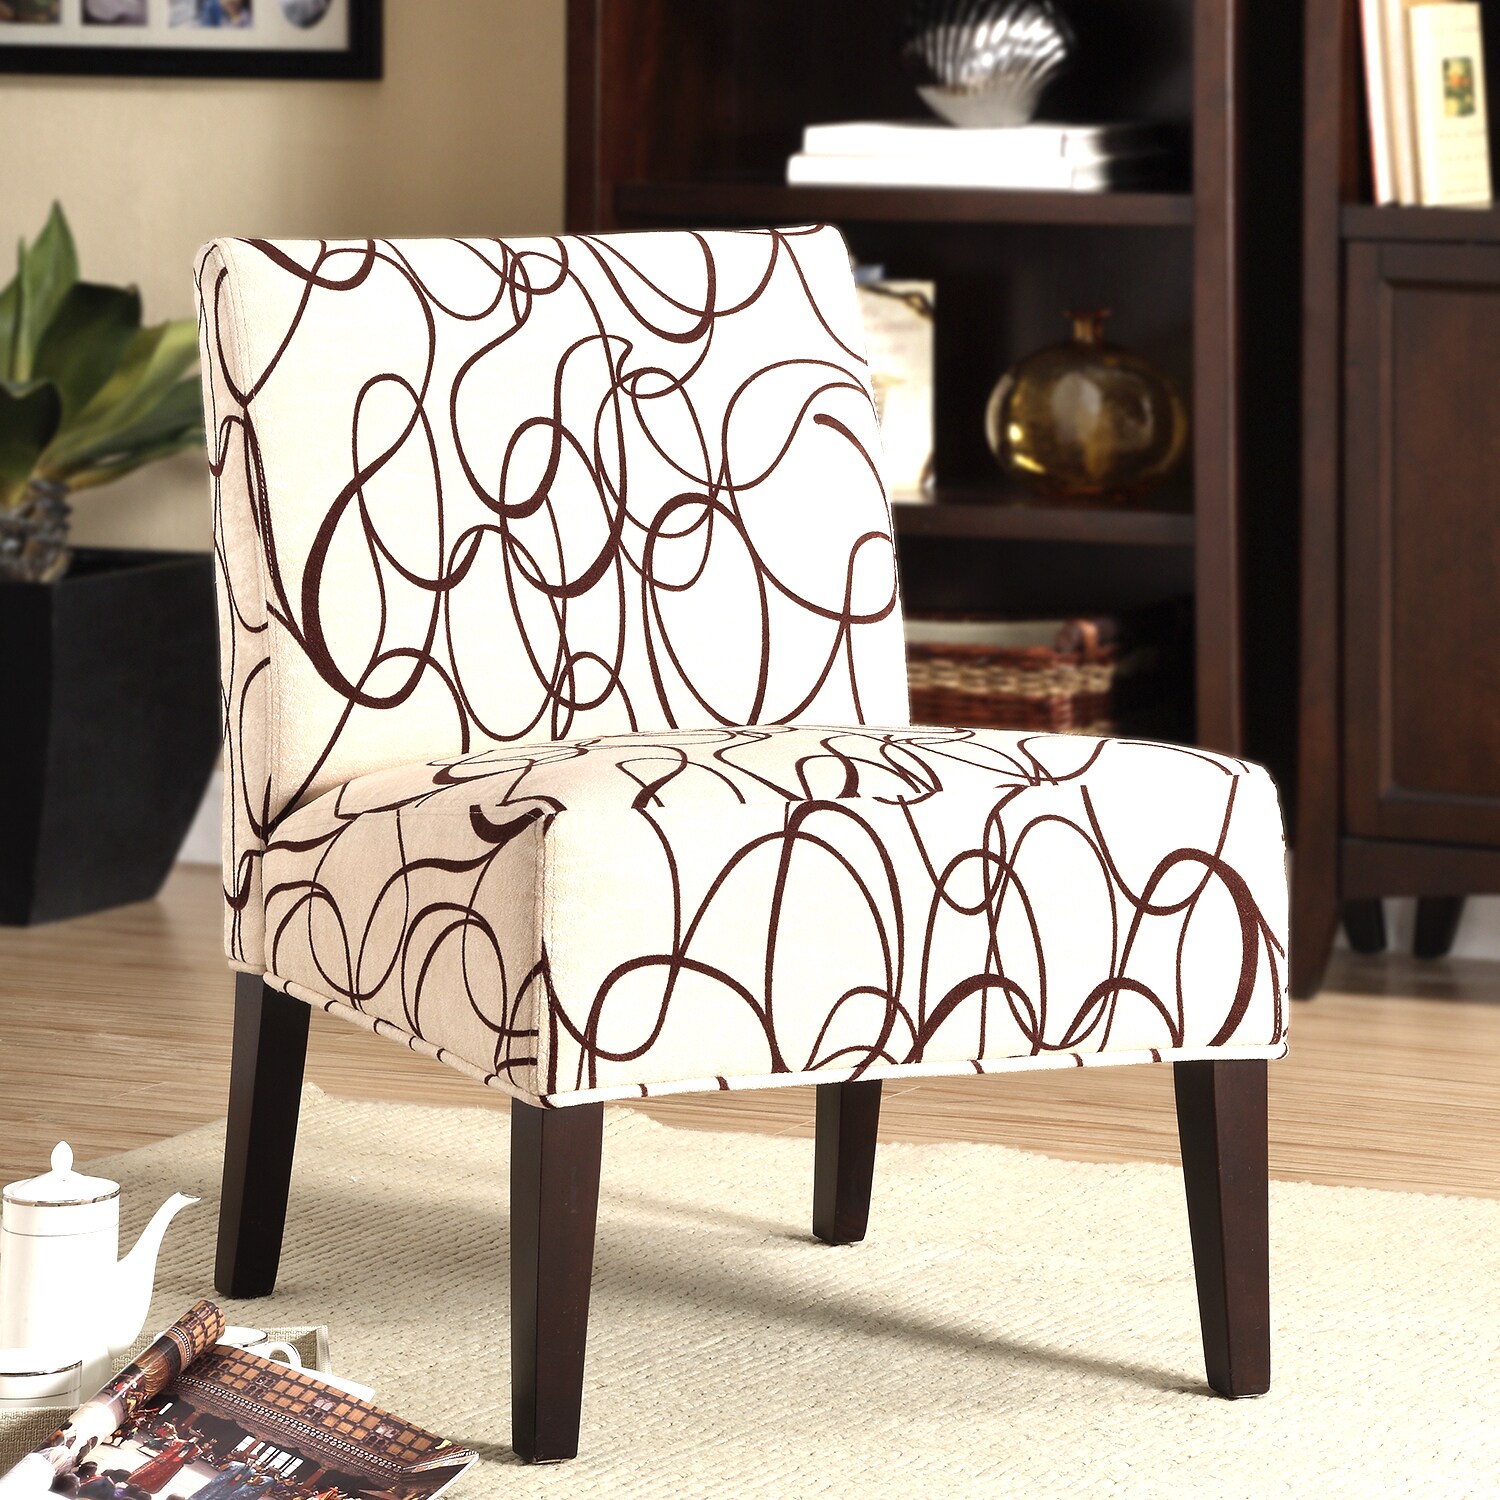 Tribecca Home Modern Brown Scroll Print Upholstered Lounge Chair